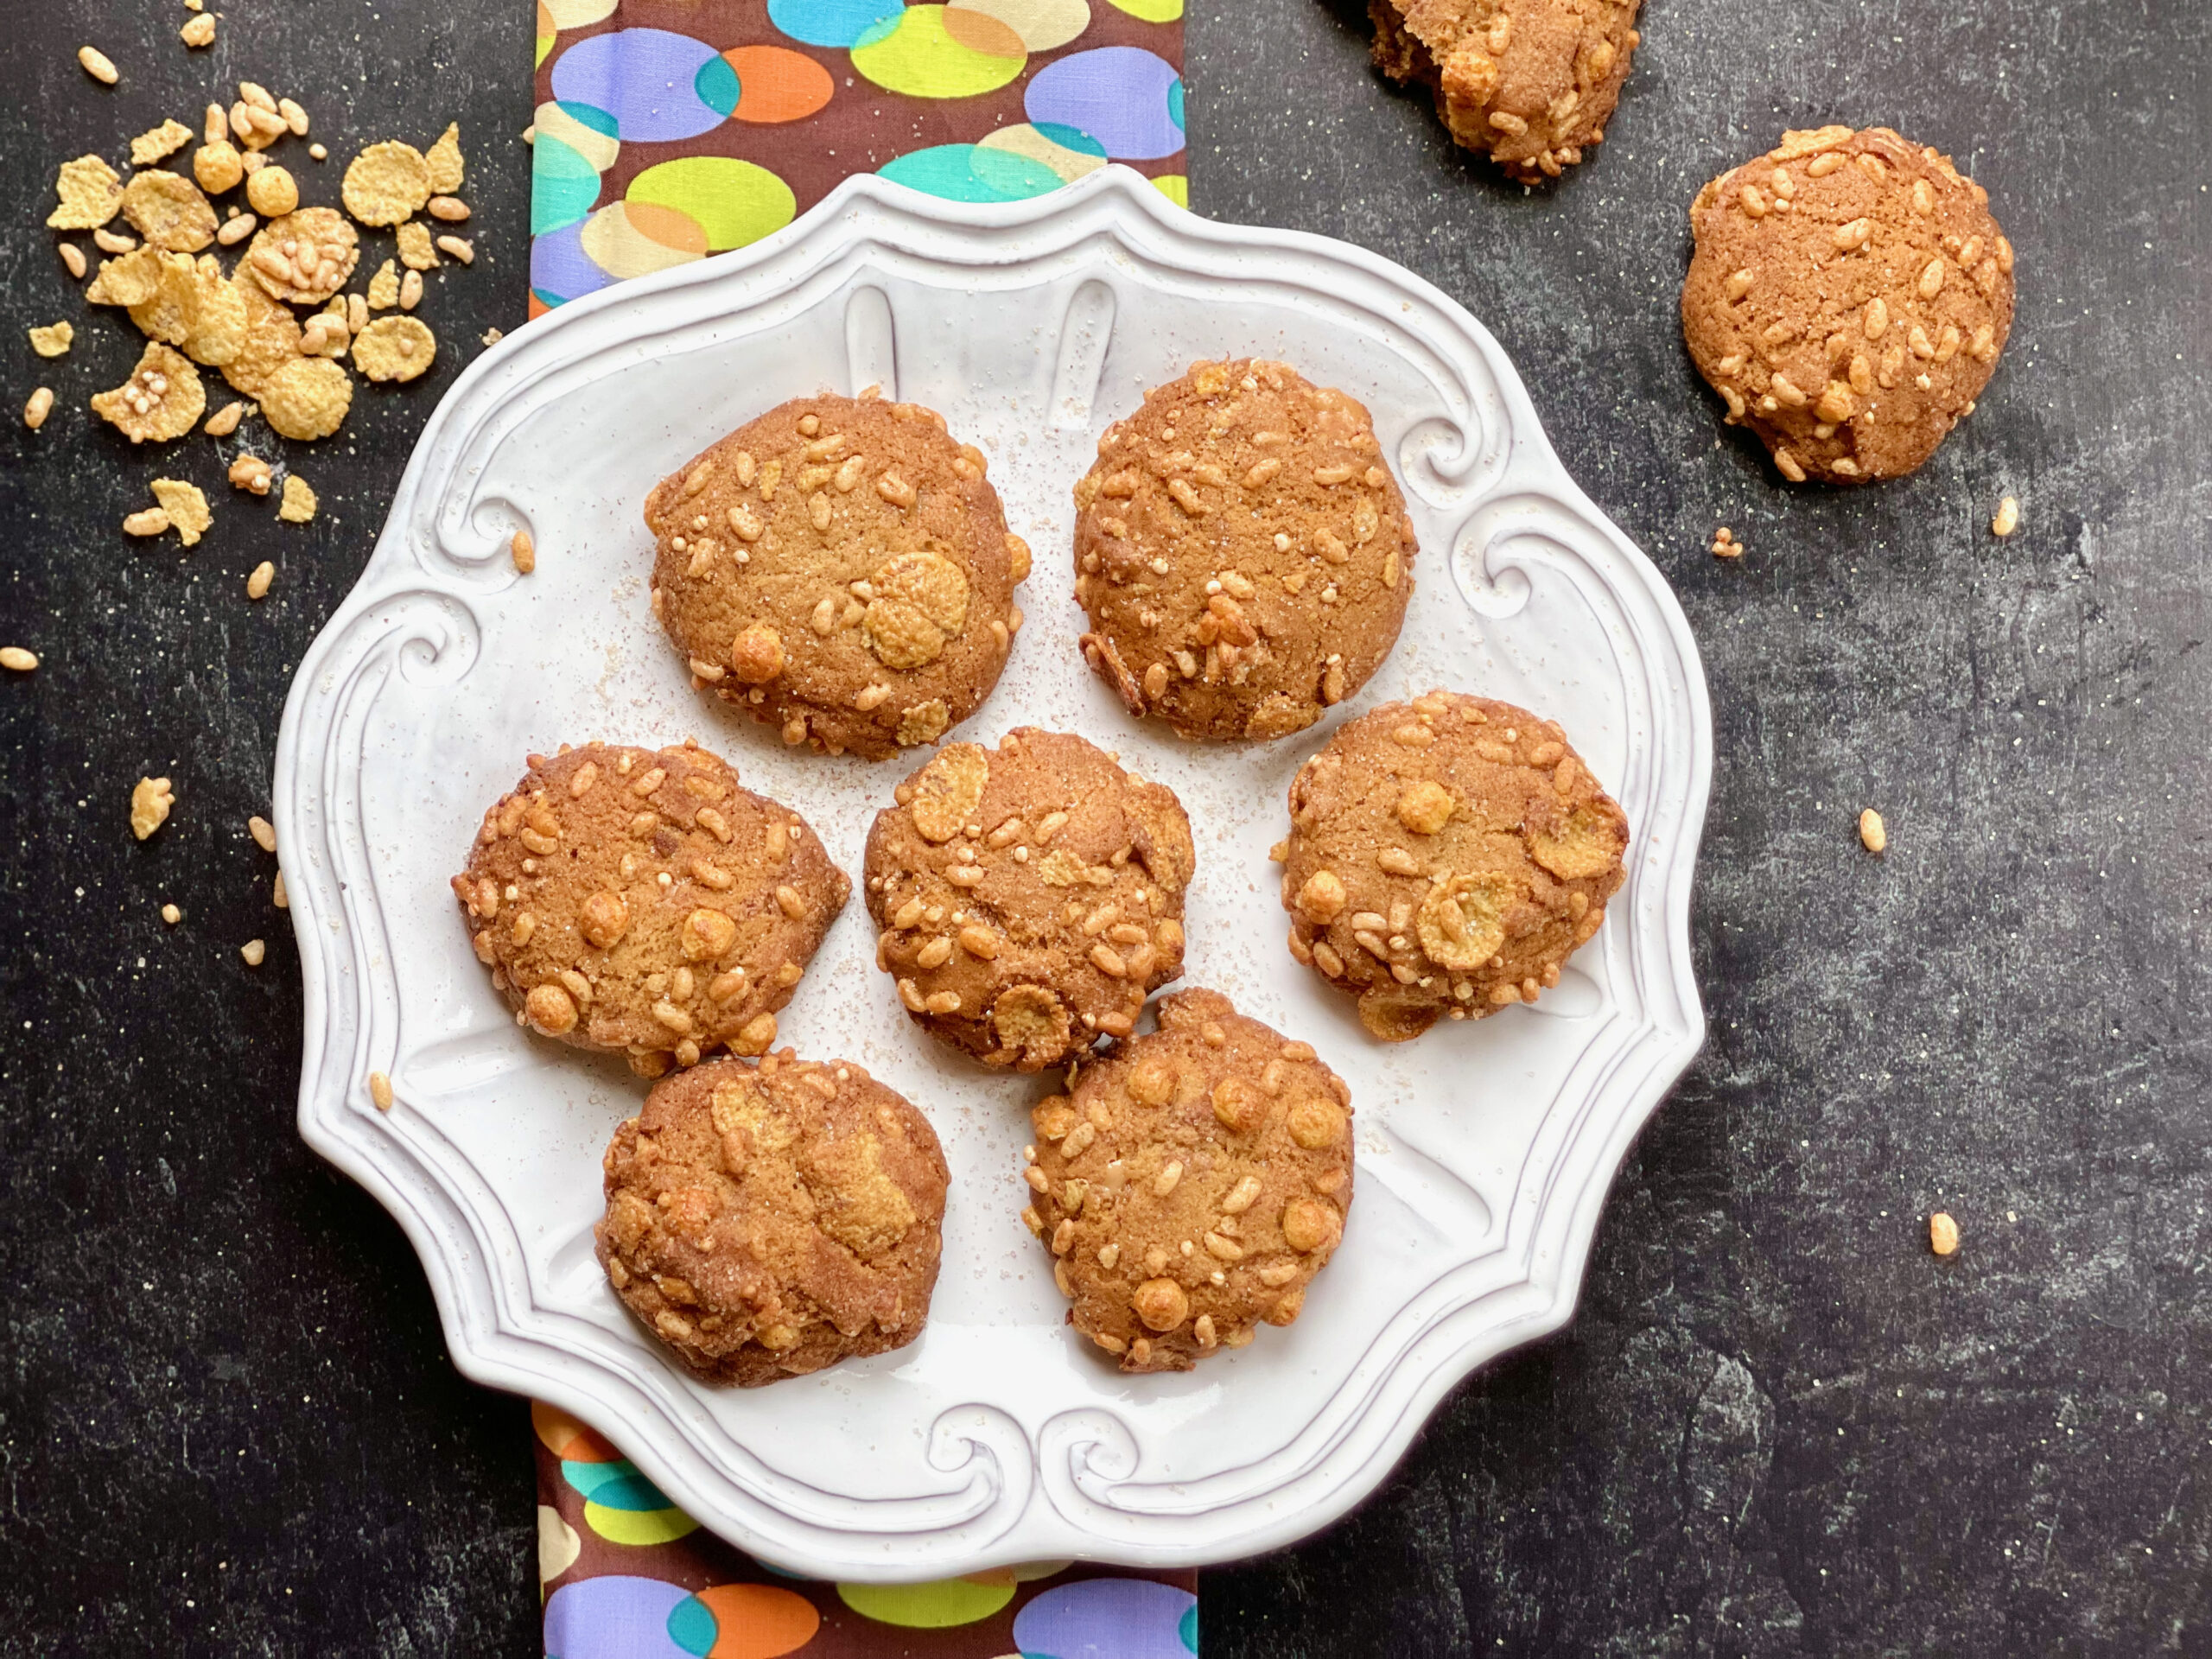 Featured image for “Cereal Toffee Crunch Cookies”